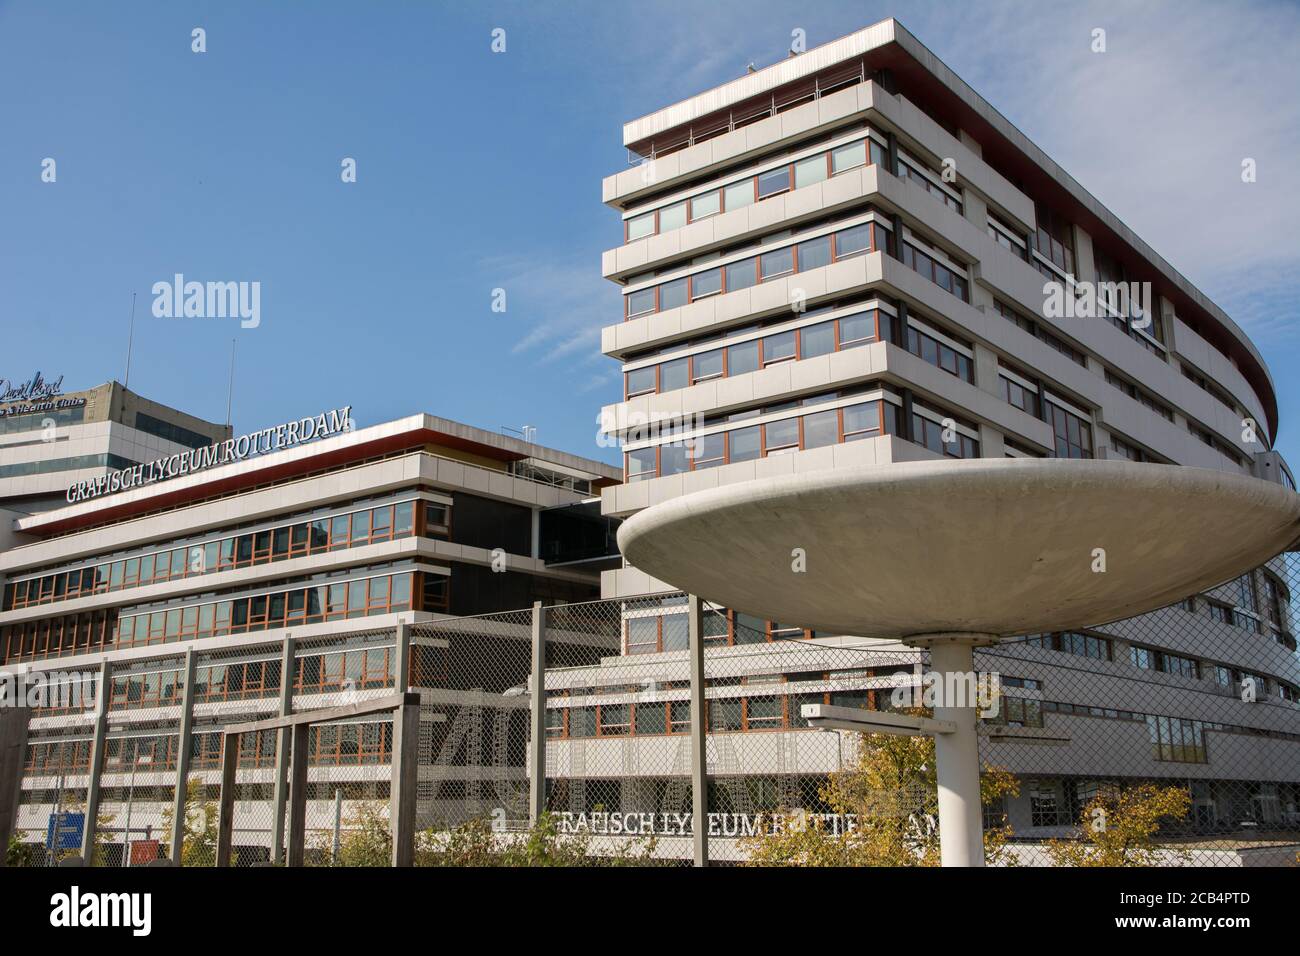 ROTTERDAM, NETHERLANDS - Sep 06, 2019: Rotterdam, Netherlands, September 2019: view on the facade of the Grafisch Lyceum in Rotterdam Stock Photo